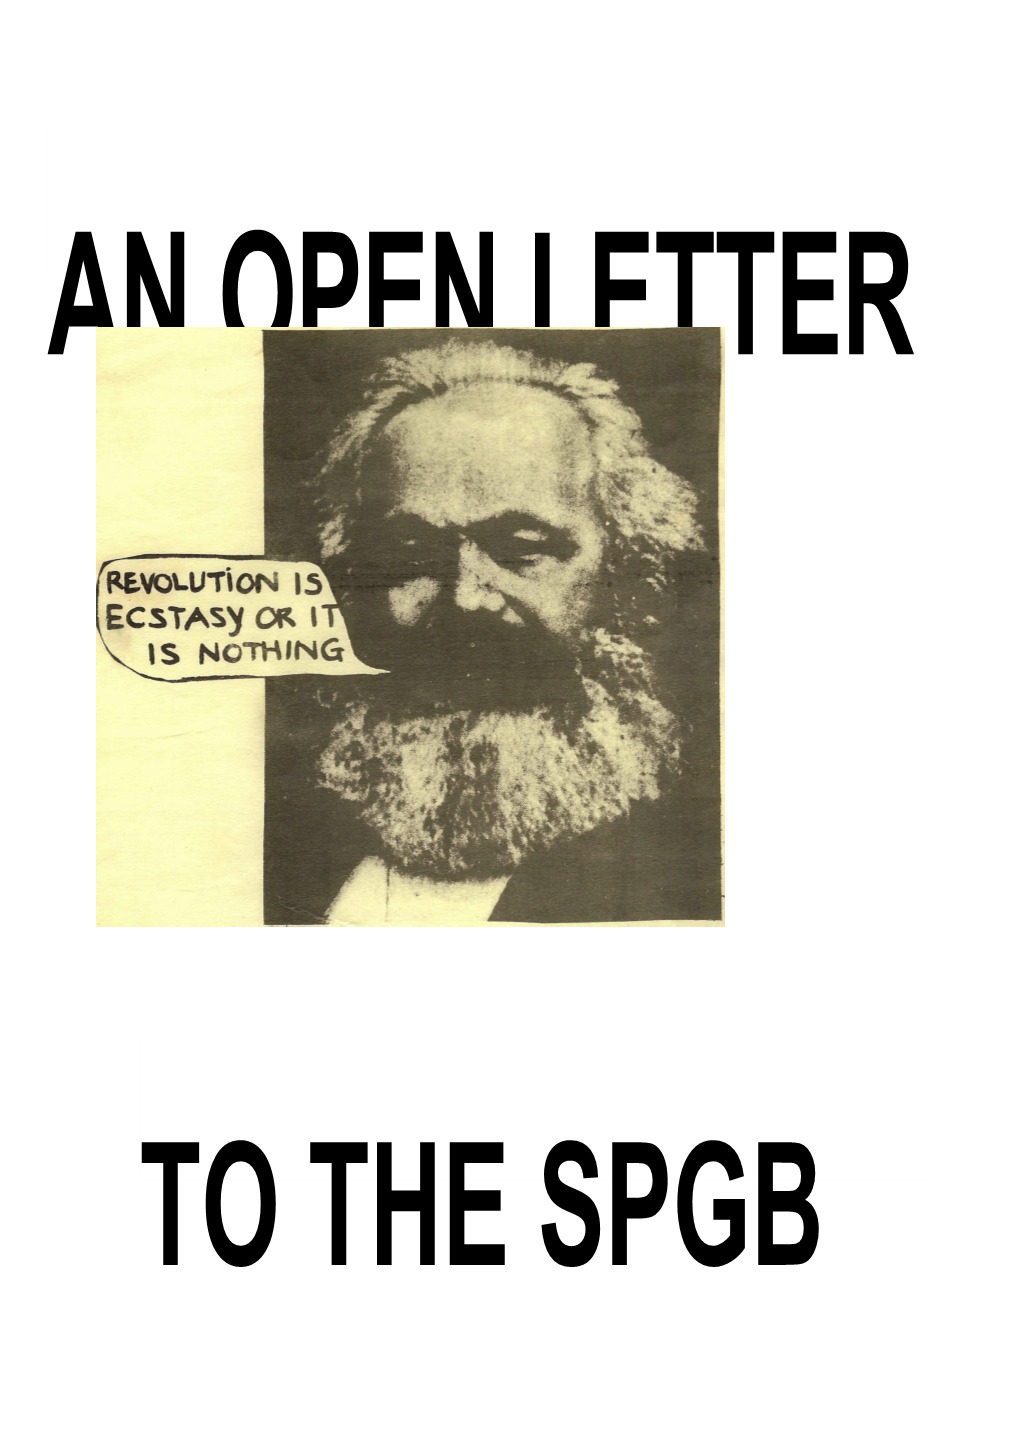 An Open Letter to the Spgb from the London Situationists